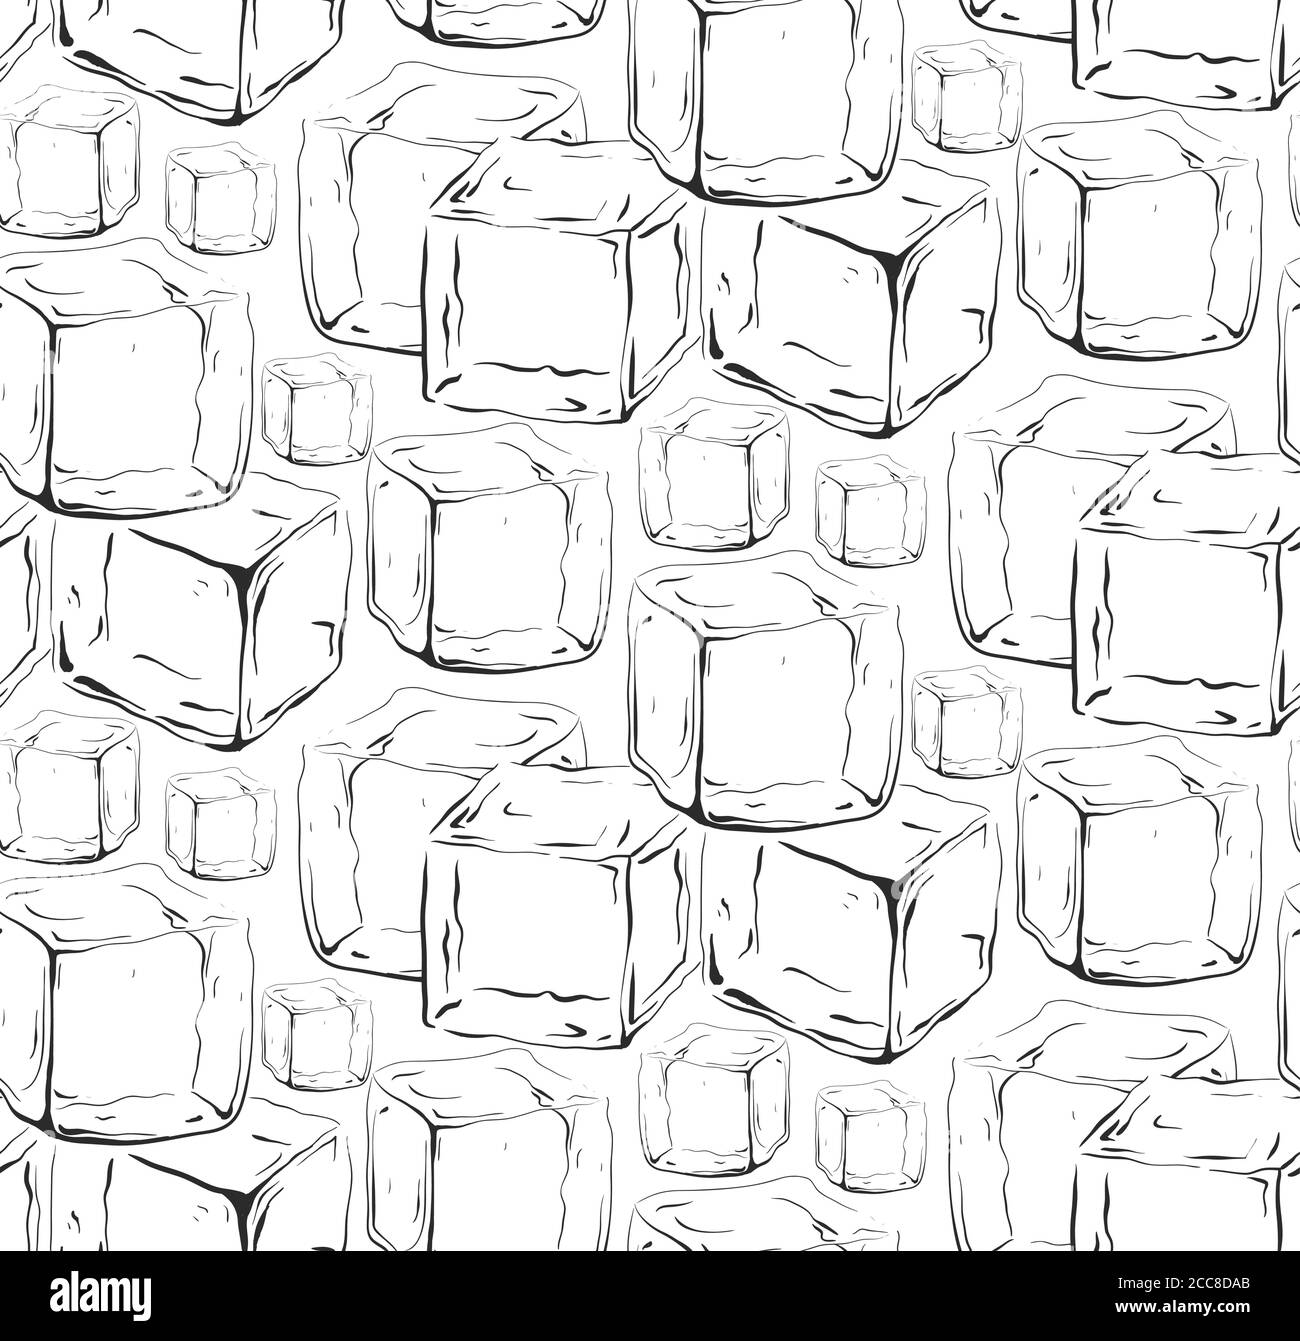 https://c8.alamy.com/comp/2CC8DAB/seamless-black-and-white-texture-with-hand-drawn-ice-cubes-vector-pattern-for-your-creativity-2CC8DAB.jpg